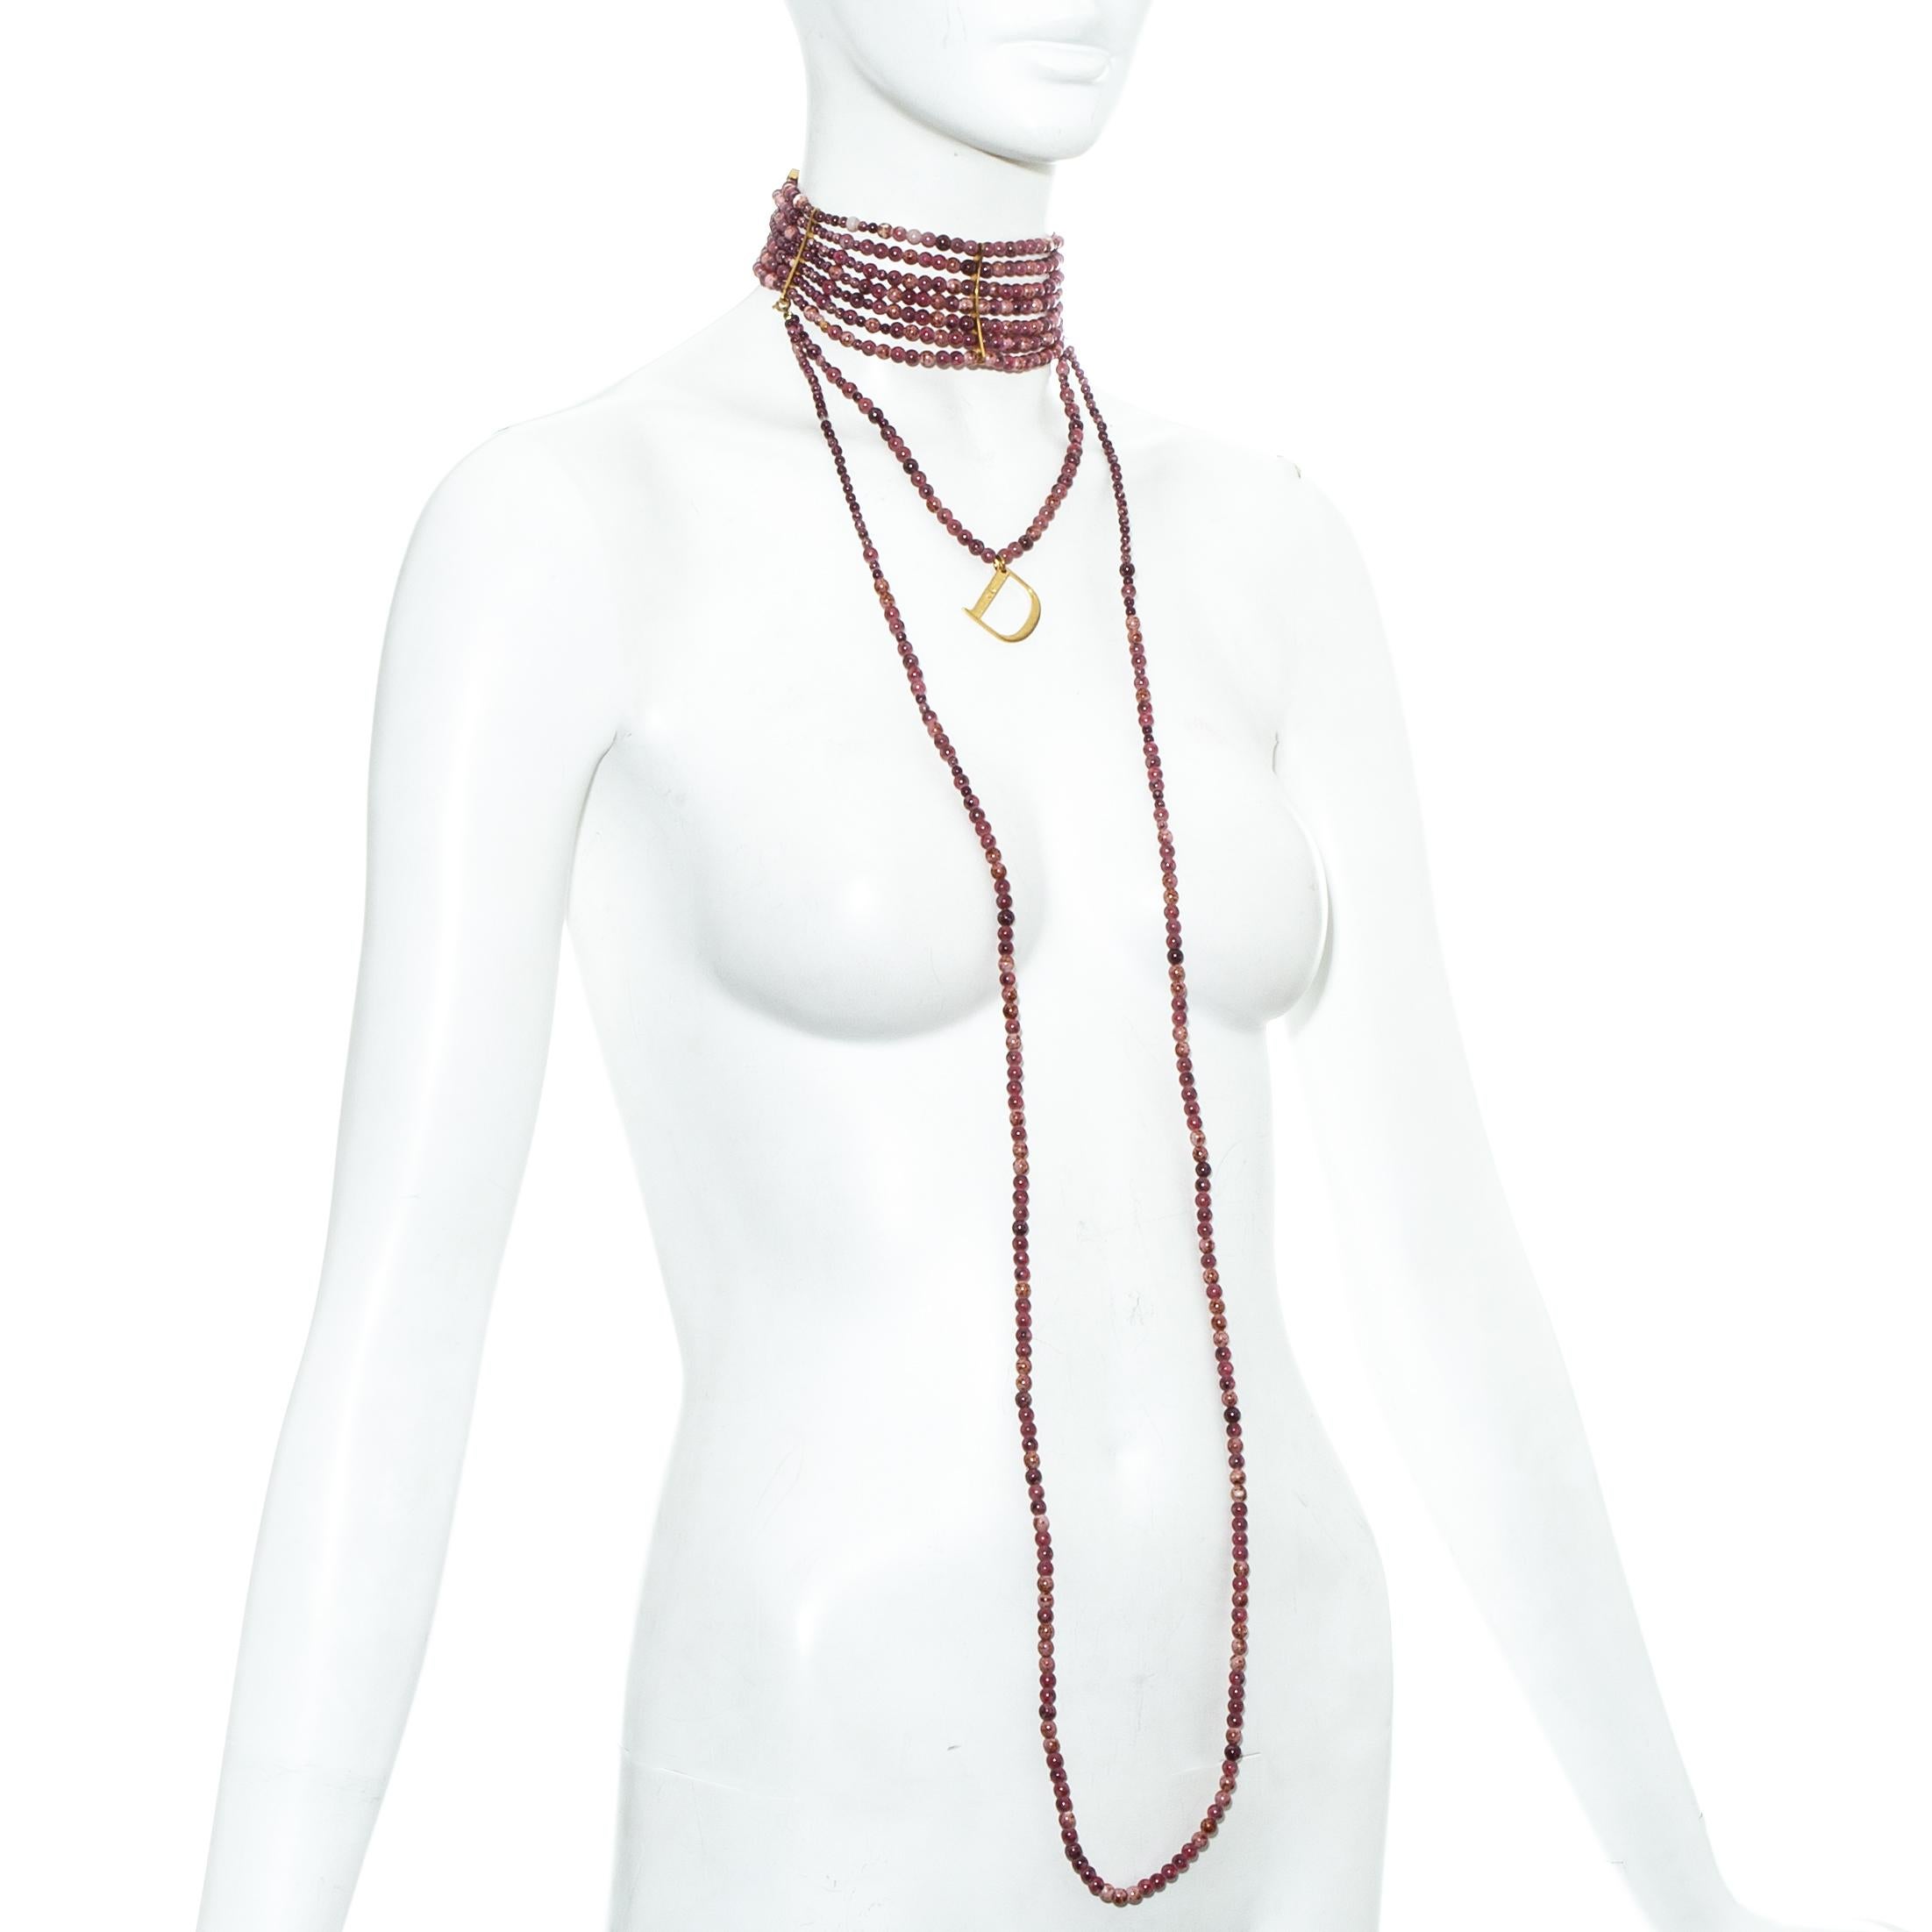 Beige Christian Dior by John Galliano pink marble glass bead choker necklace, fw 1999